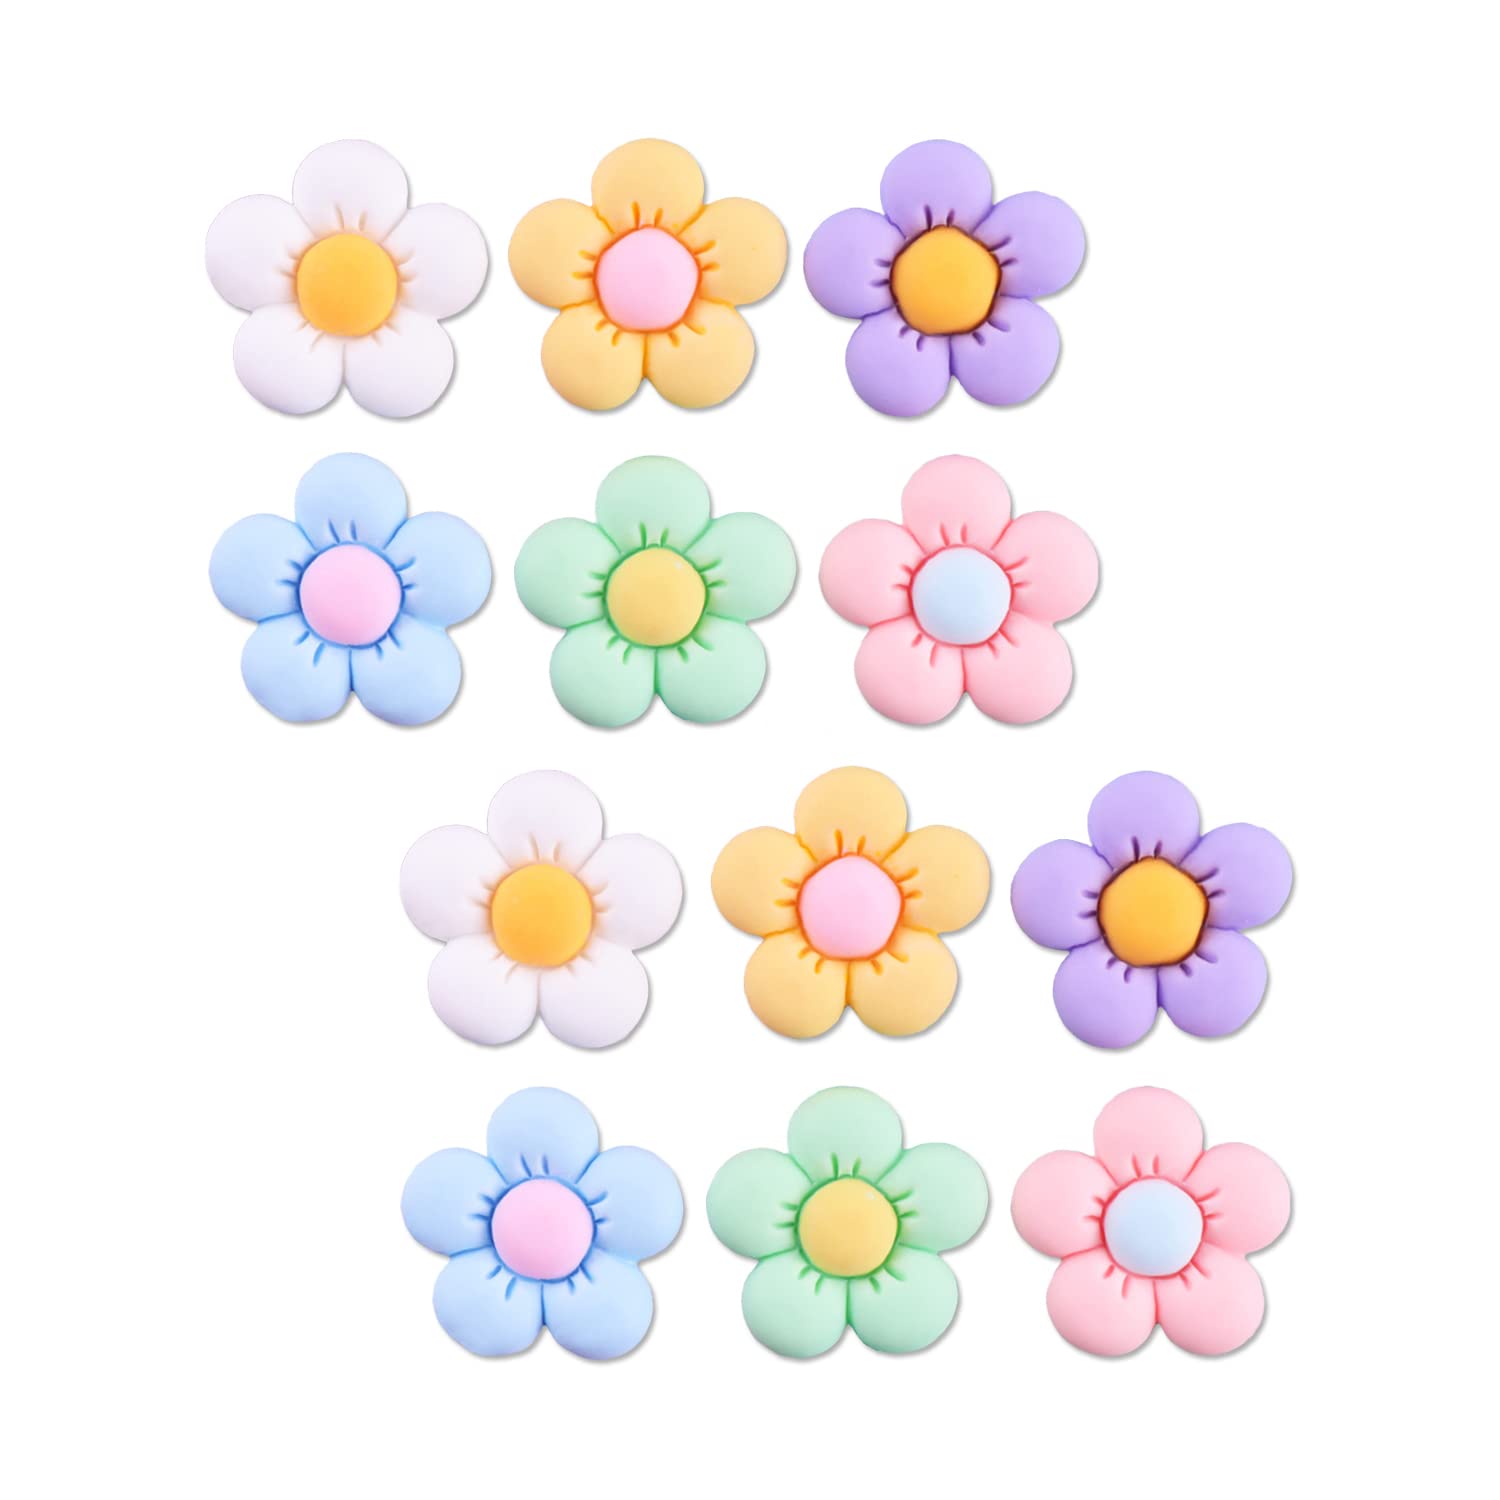 AD. Myhm Cute Flower Shoe Charms 12Pcs Flower Shoe Charms Clog Pins Gifts For Girls Women